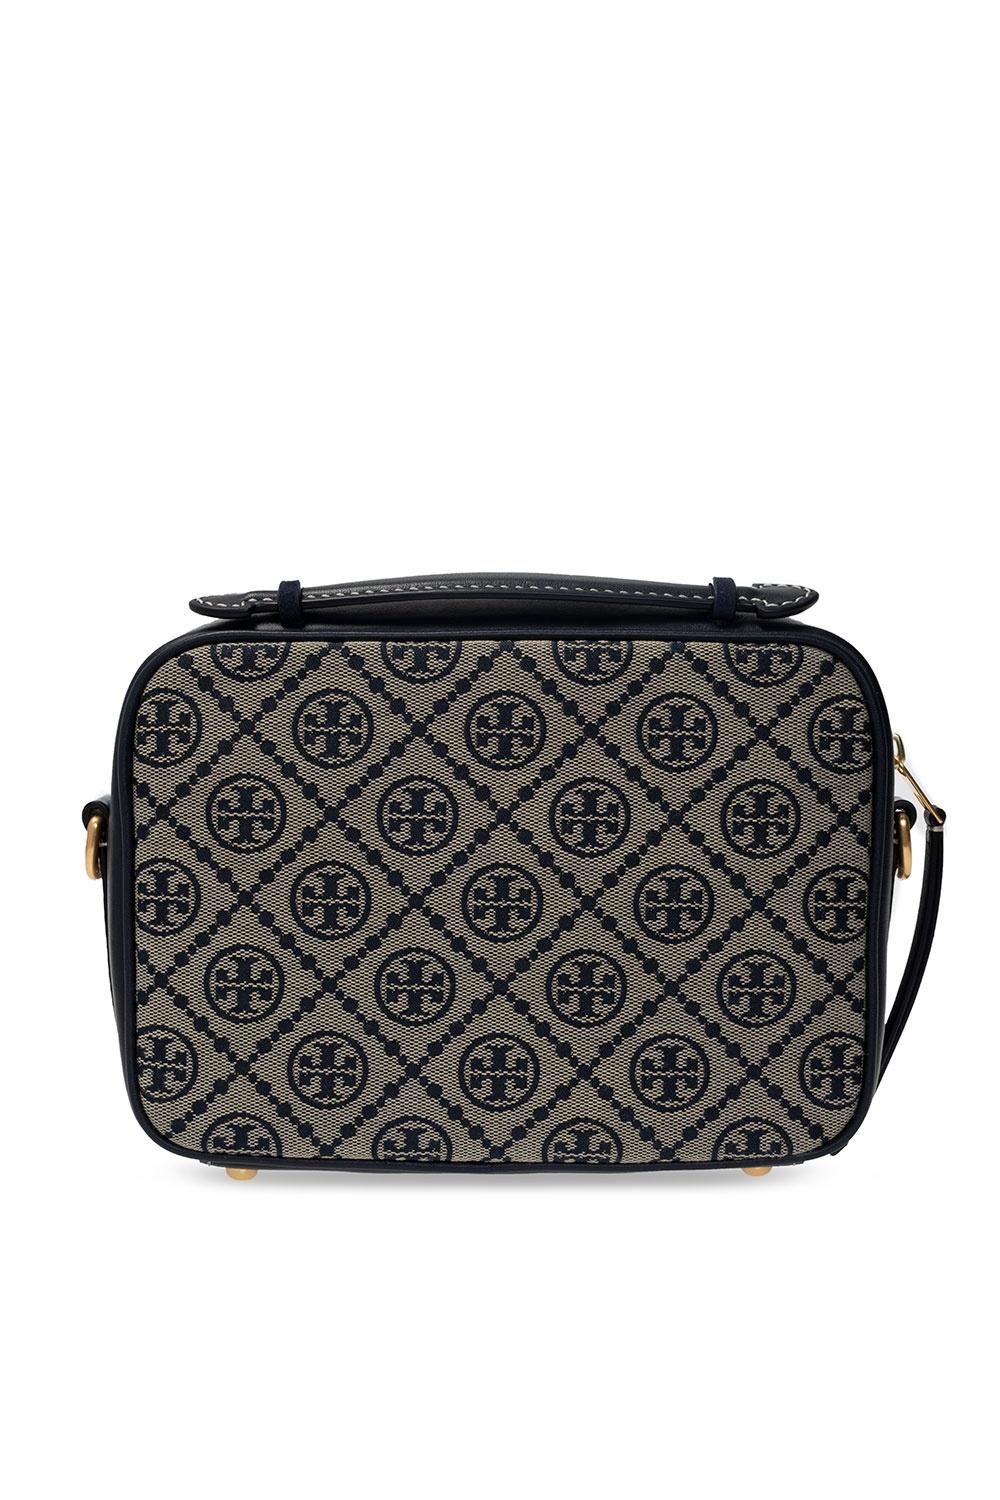 NEW Tory Burch T Monogram Shiso Leather Camera Bag - $378